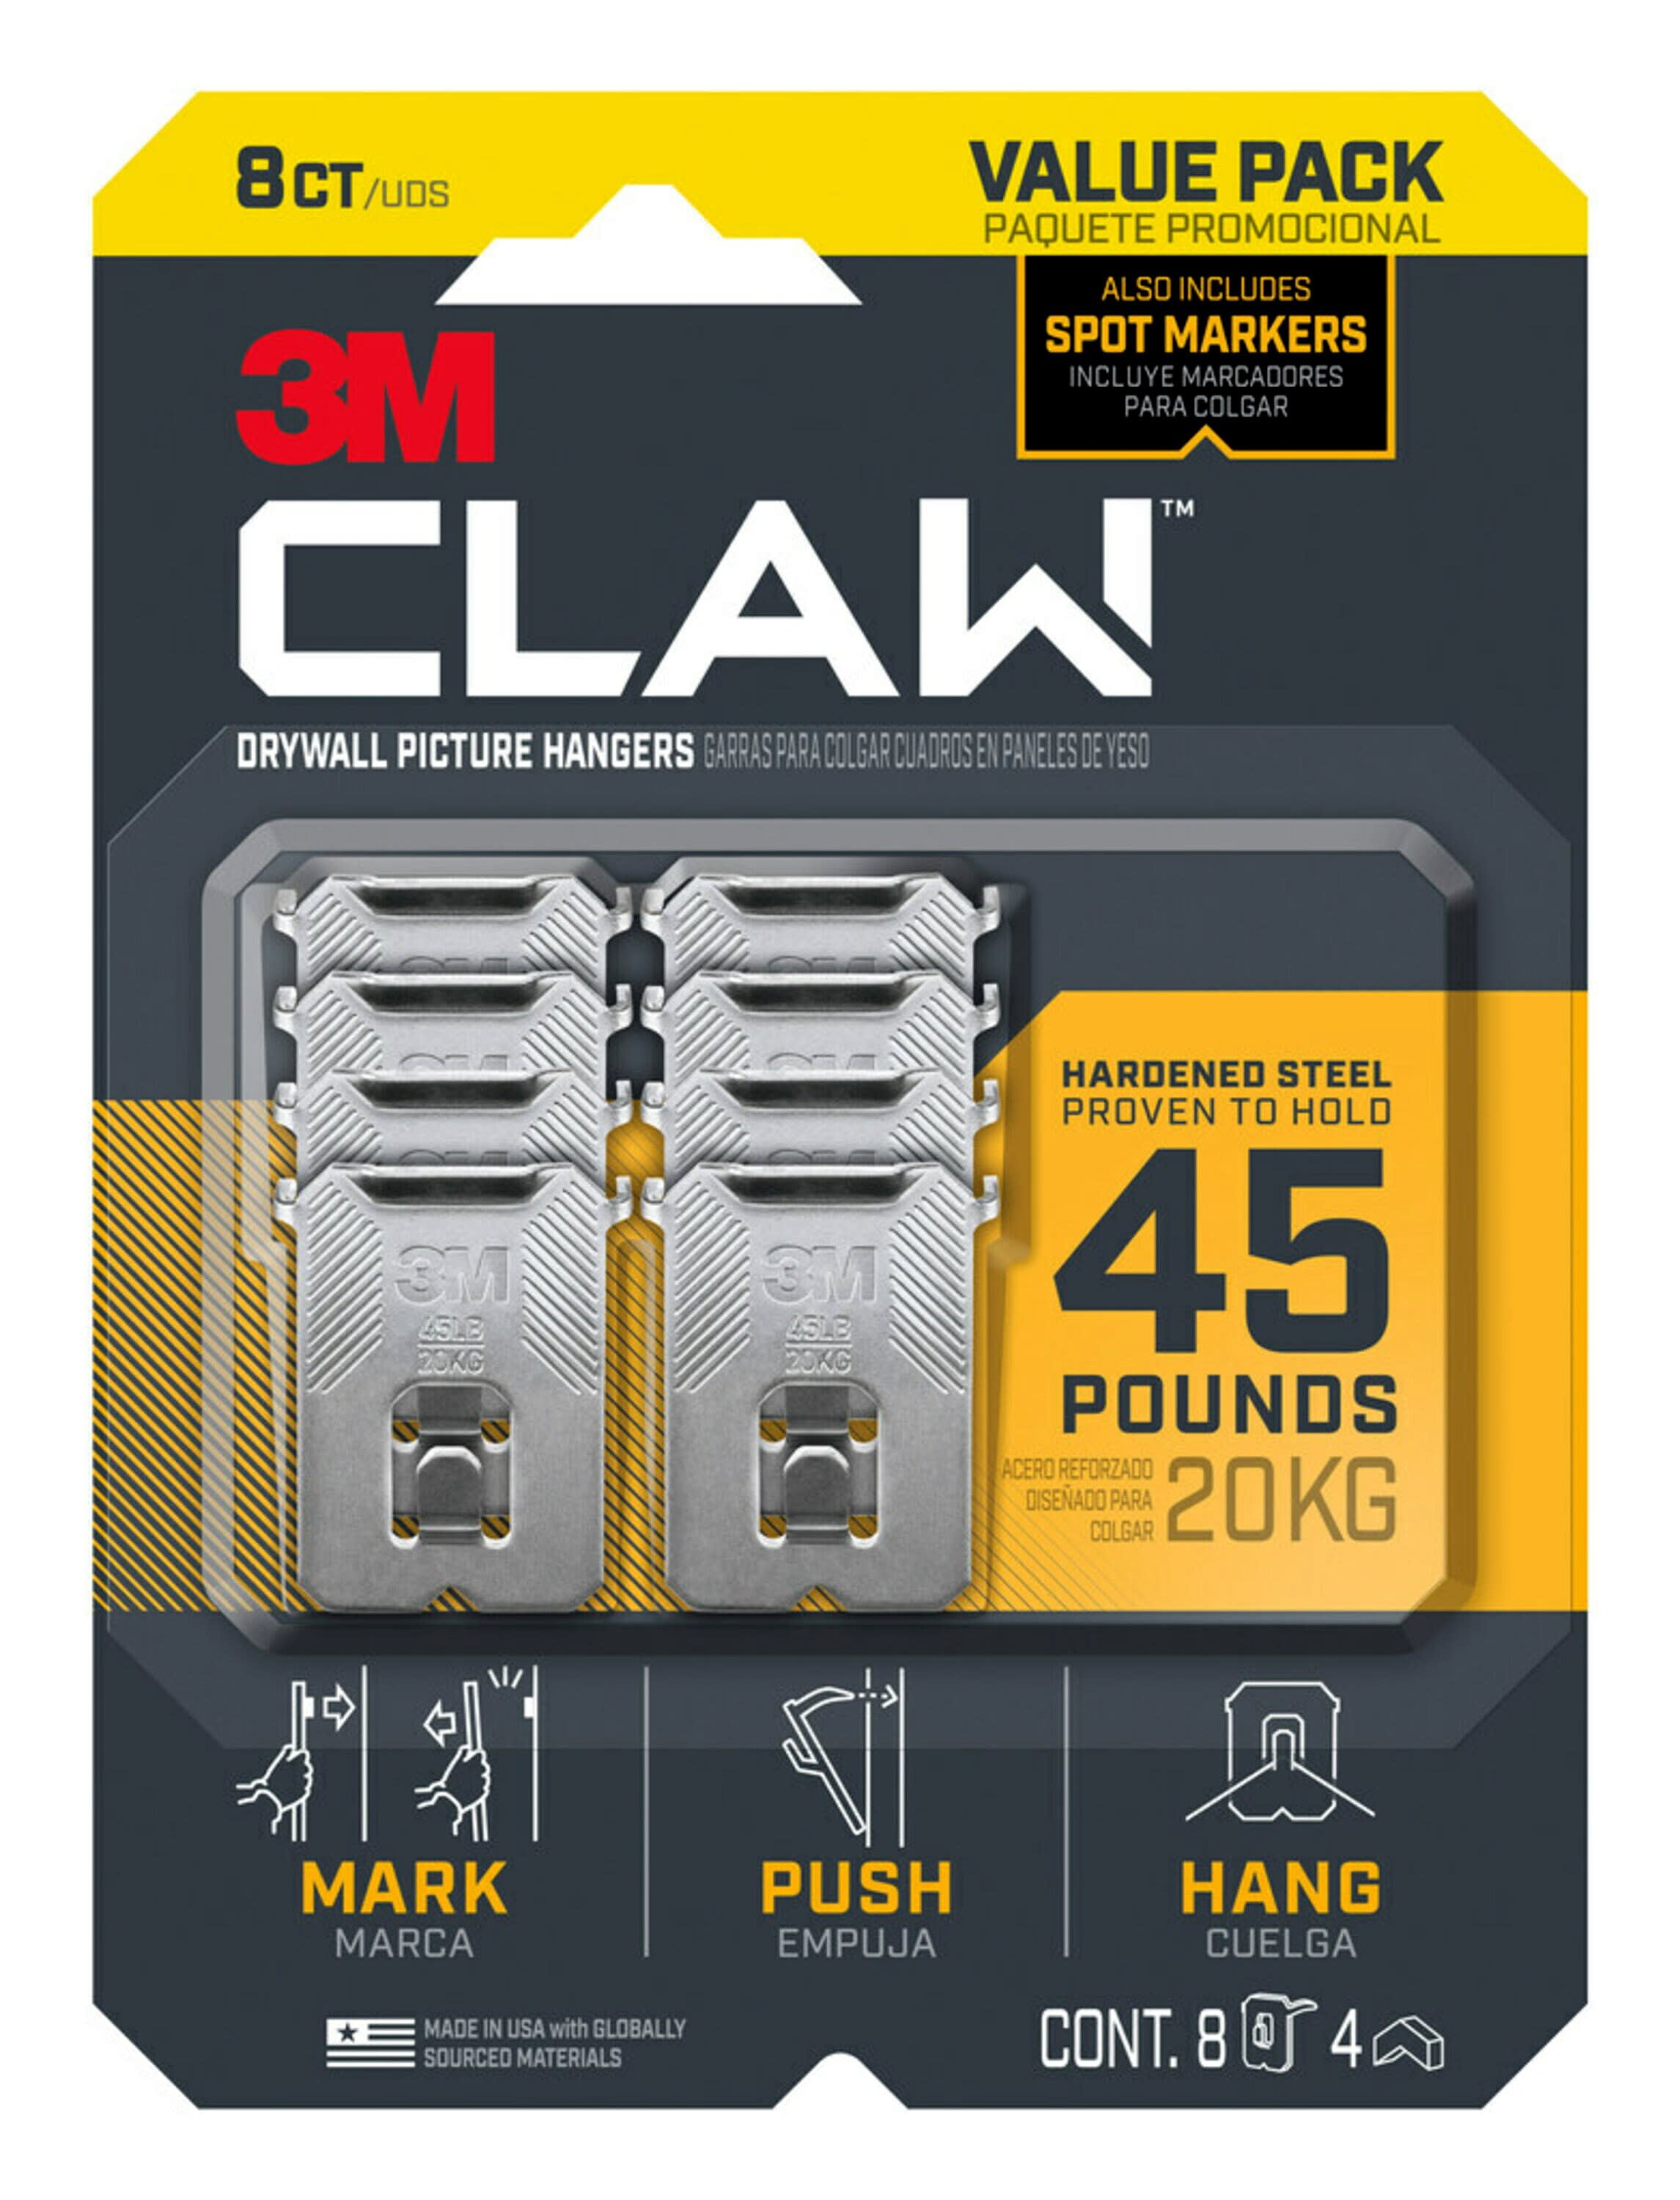 3M Claw Drywall Picture Hanger with Temporary Spot Marker, Holds 45 lbs, 8 Hangers, 4 Markers, Size: Medium